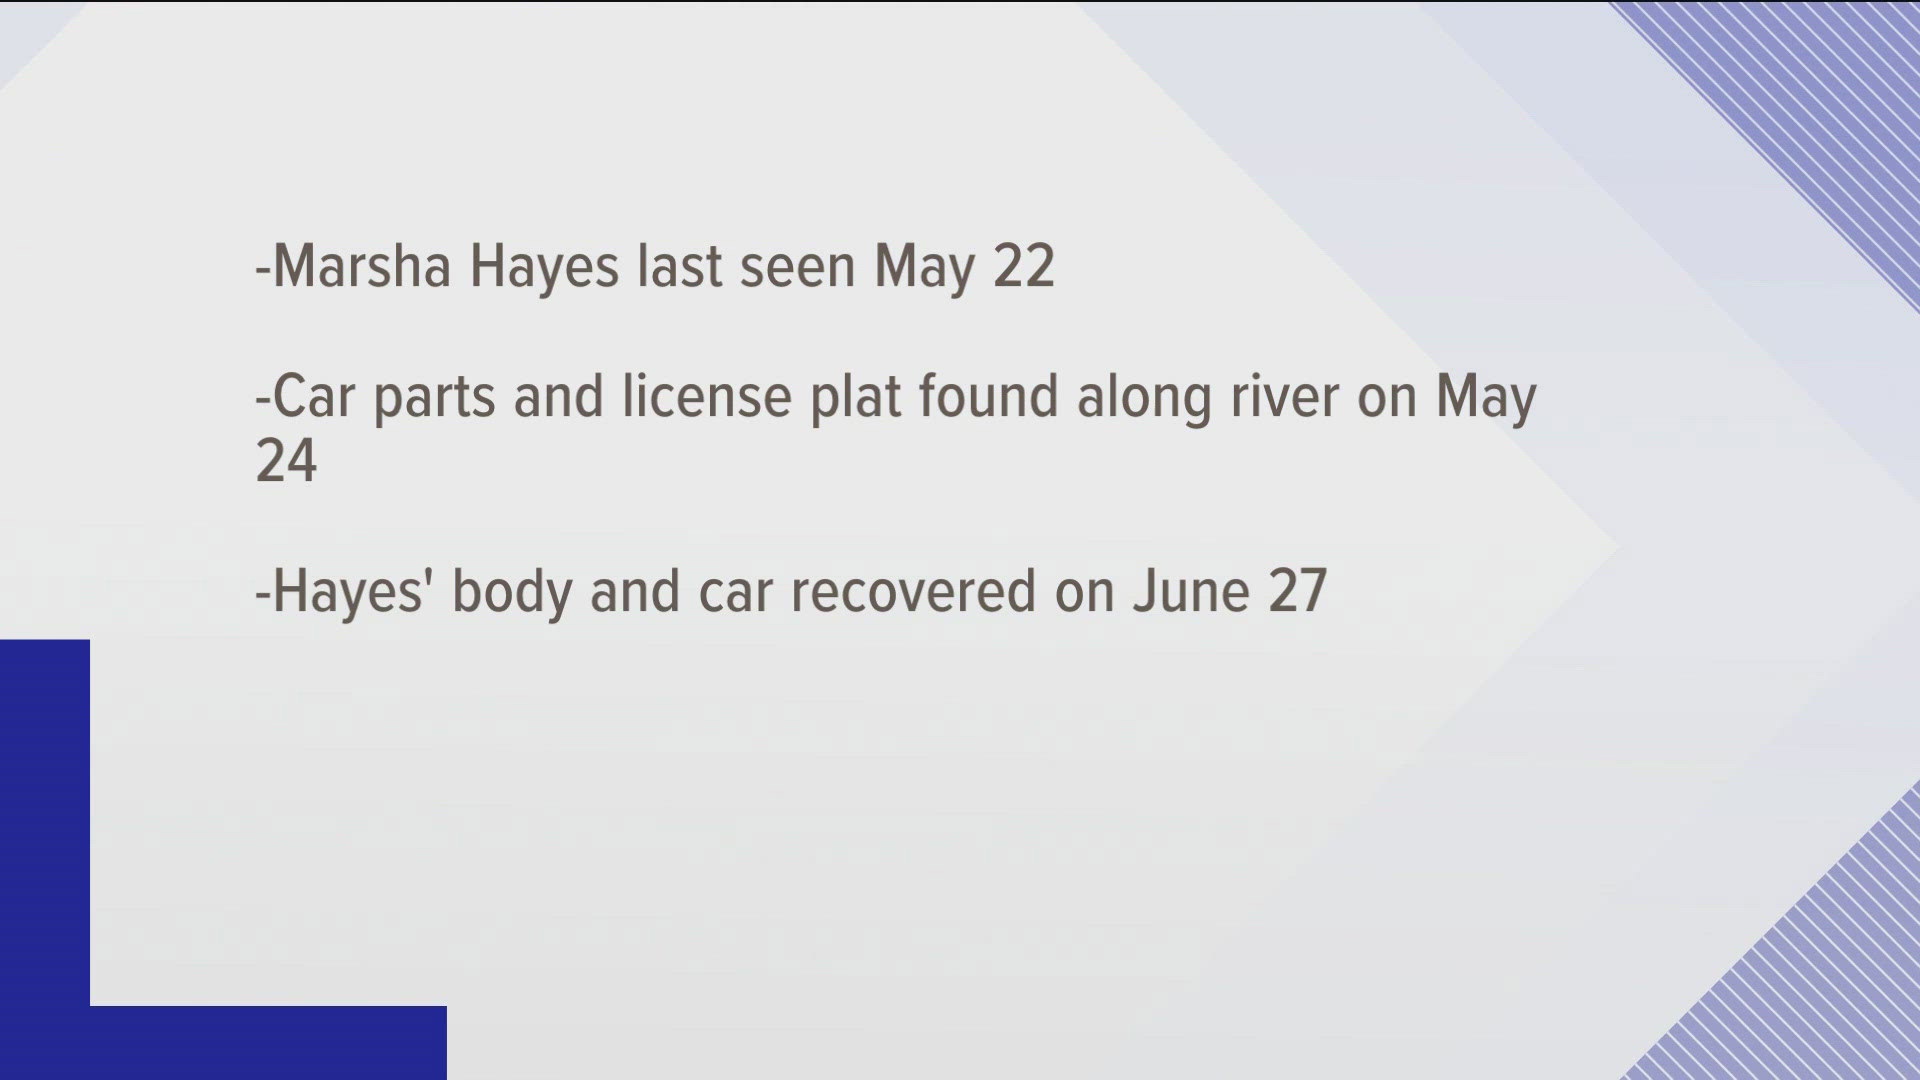 On June 27, recovery efforts led to Marsha Hayes remains and car being pulled from the river.